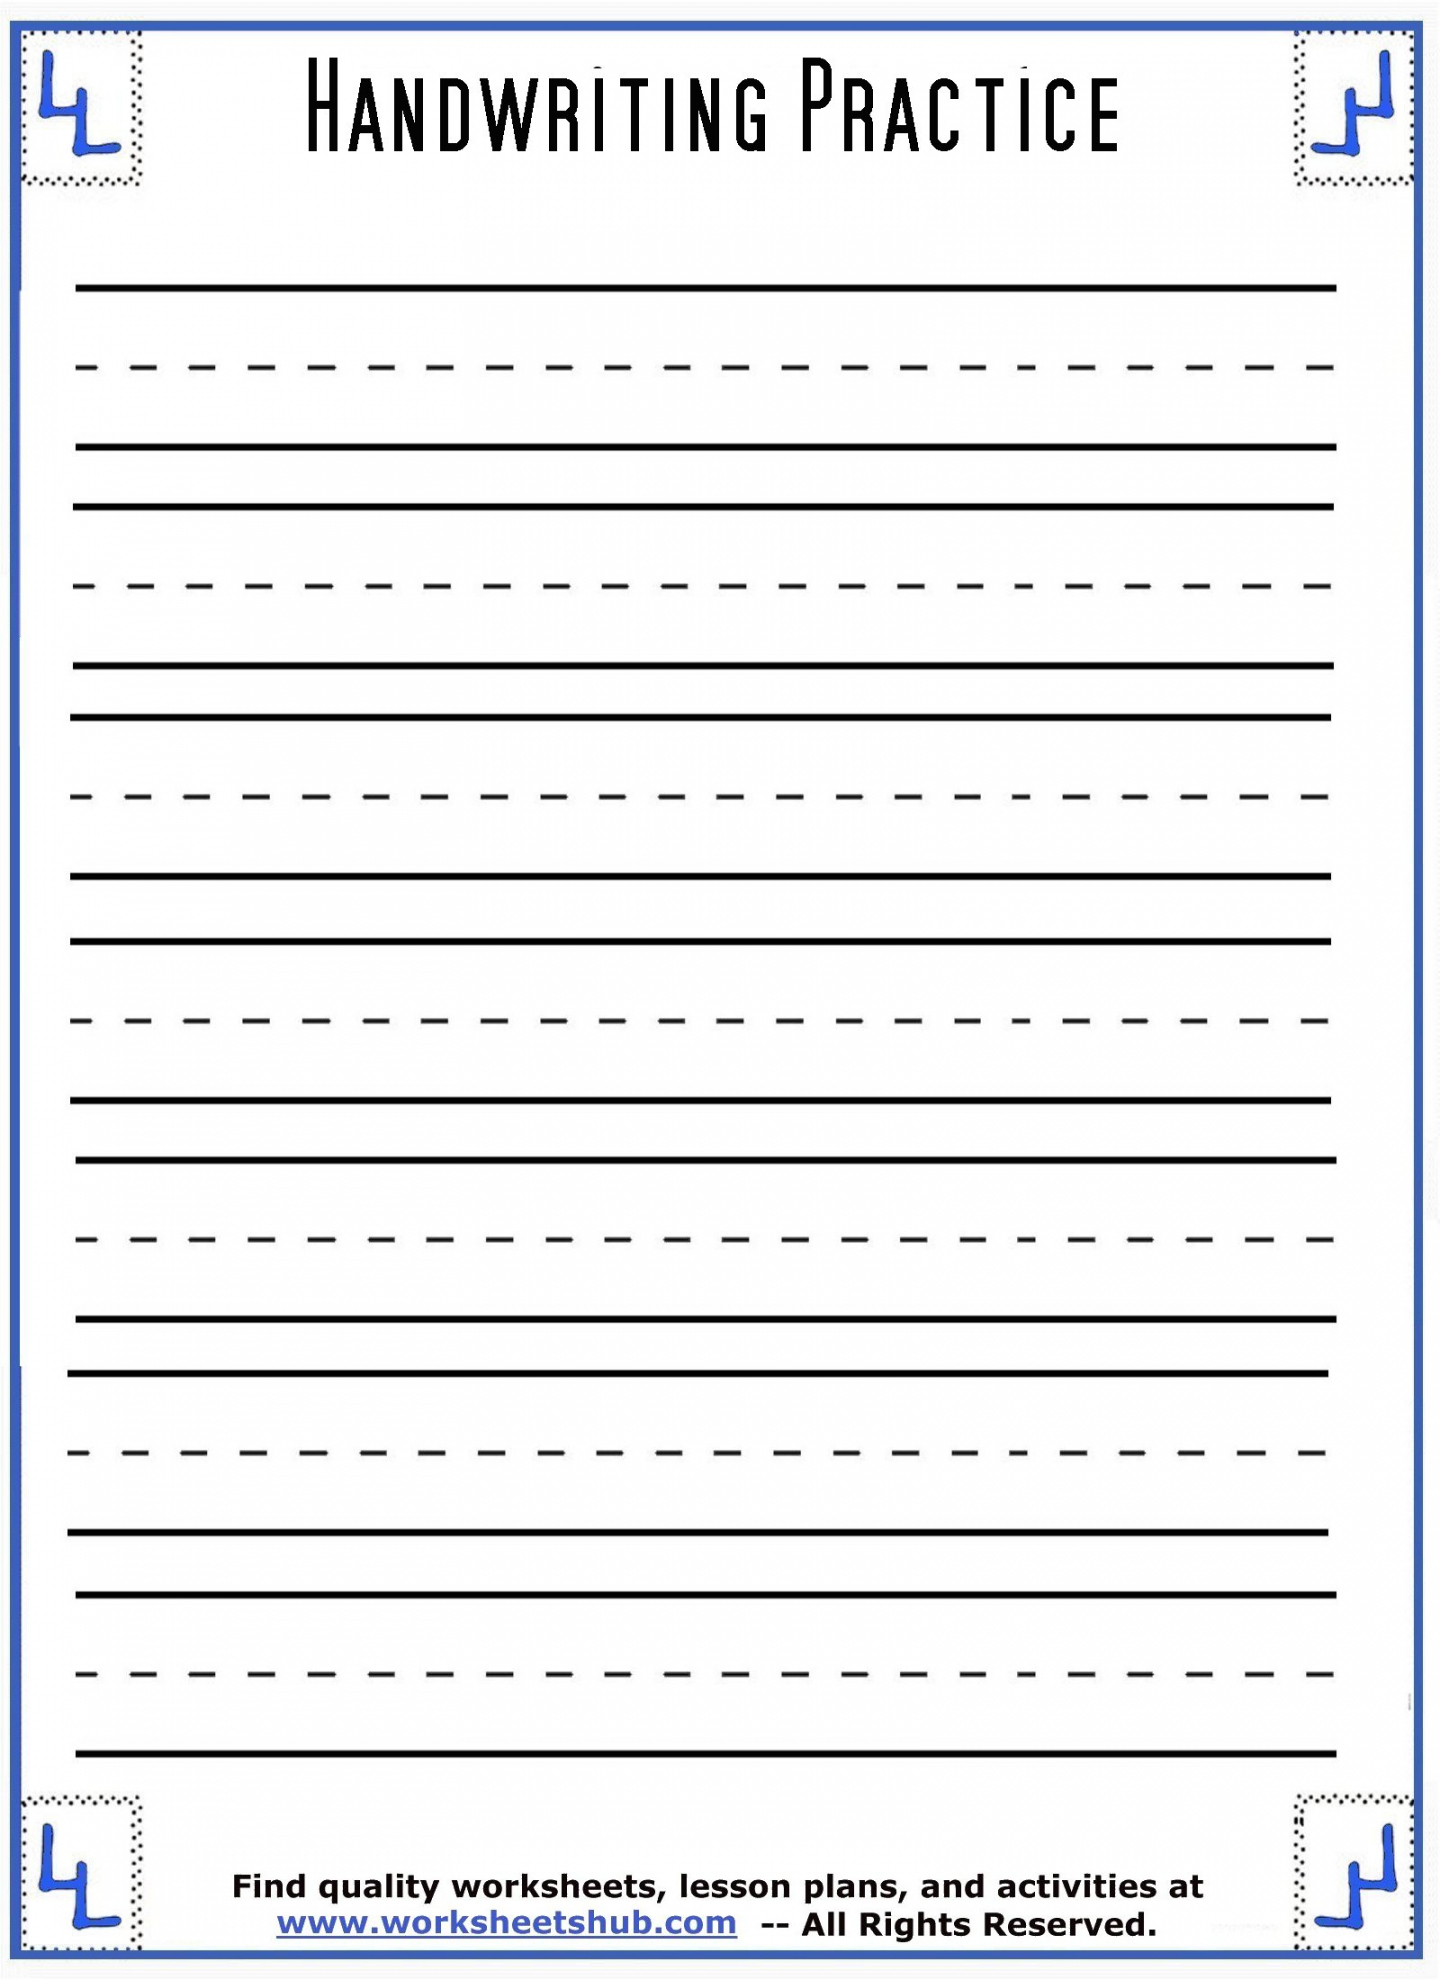 Handwriting Sheets:Printable -Lined Paper - FREE Printables - Lined Handwriting Paper Printable